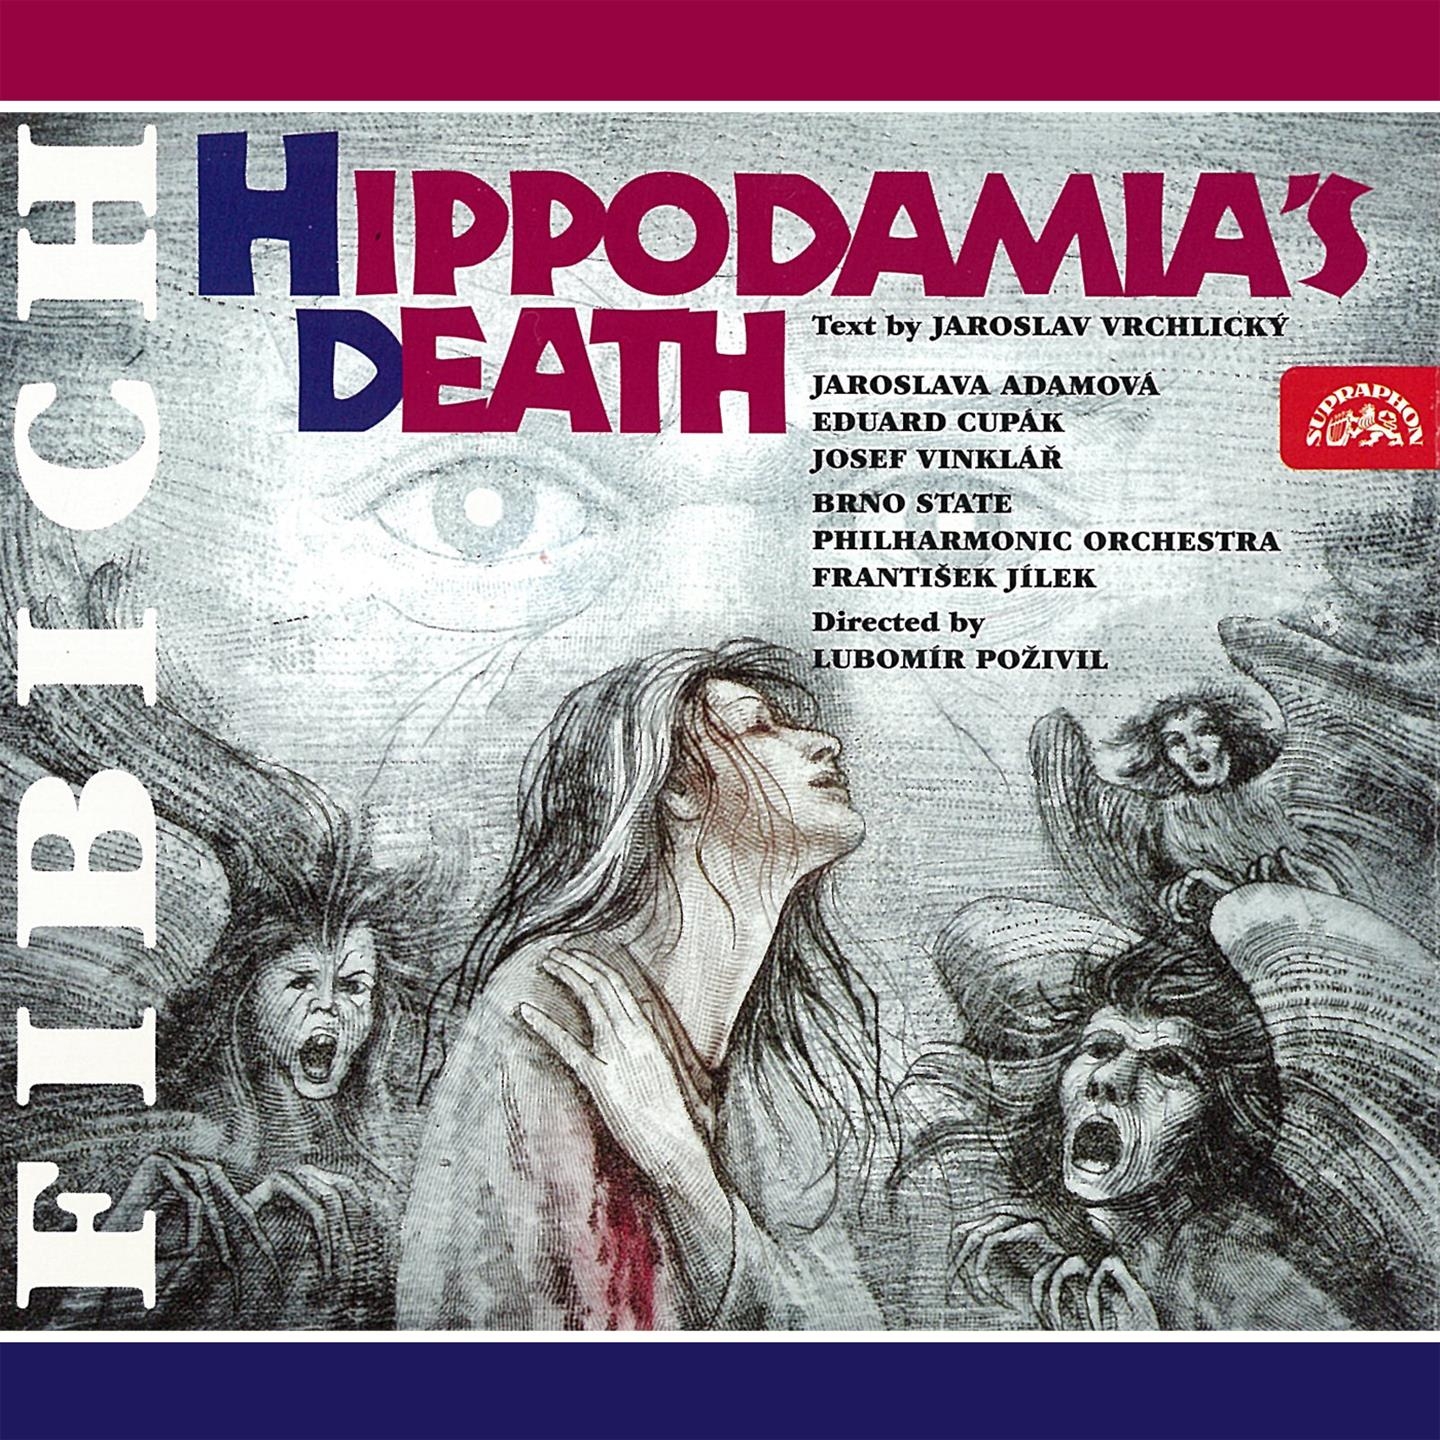 Hippodamia s Death, Op. 33, .: Act 3  Scene Three: You re mourning for Chrysippus